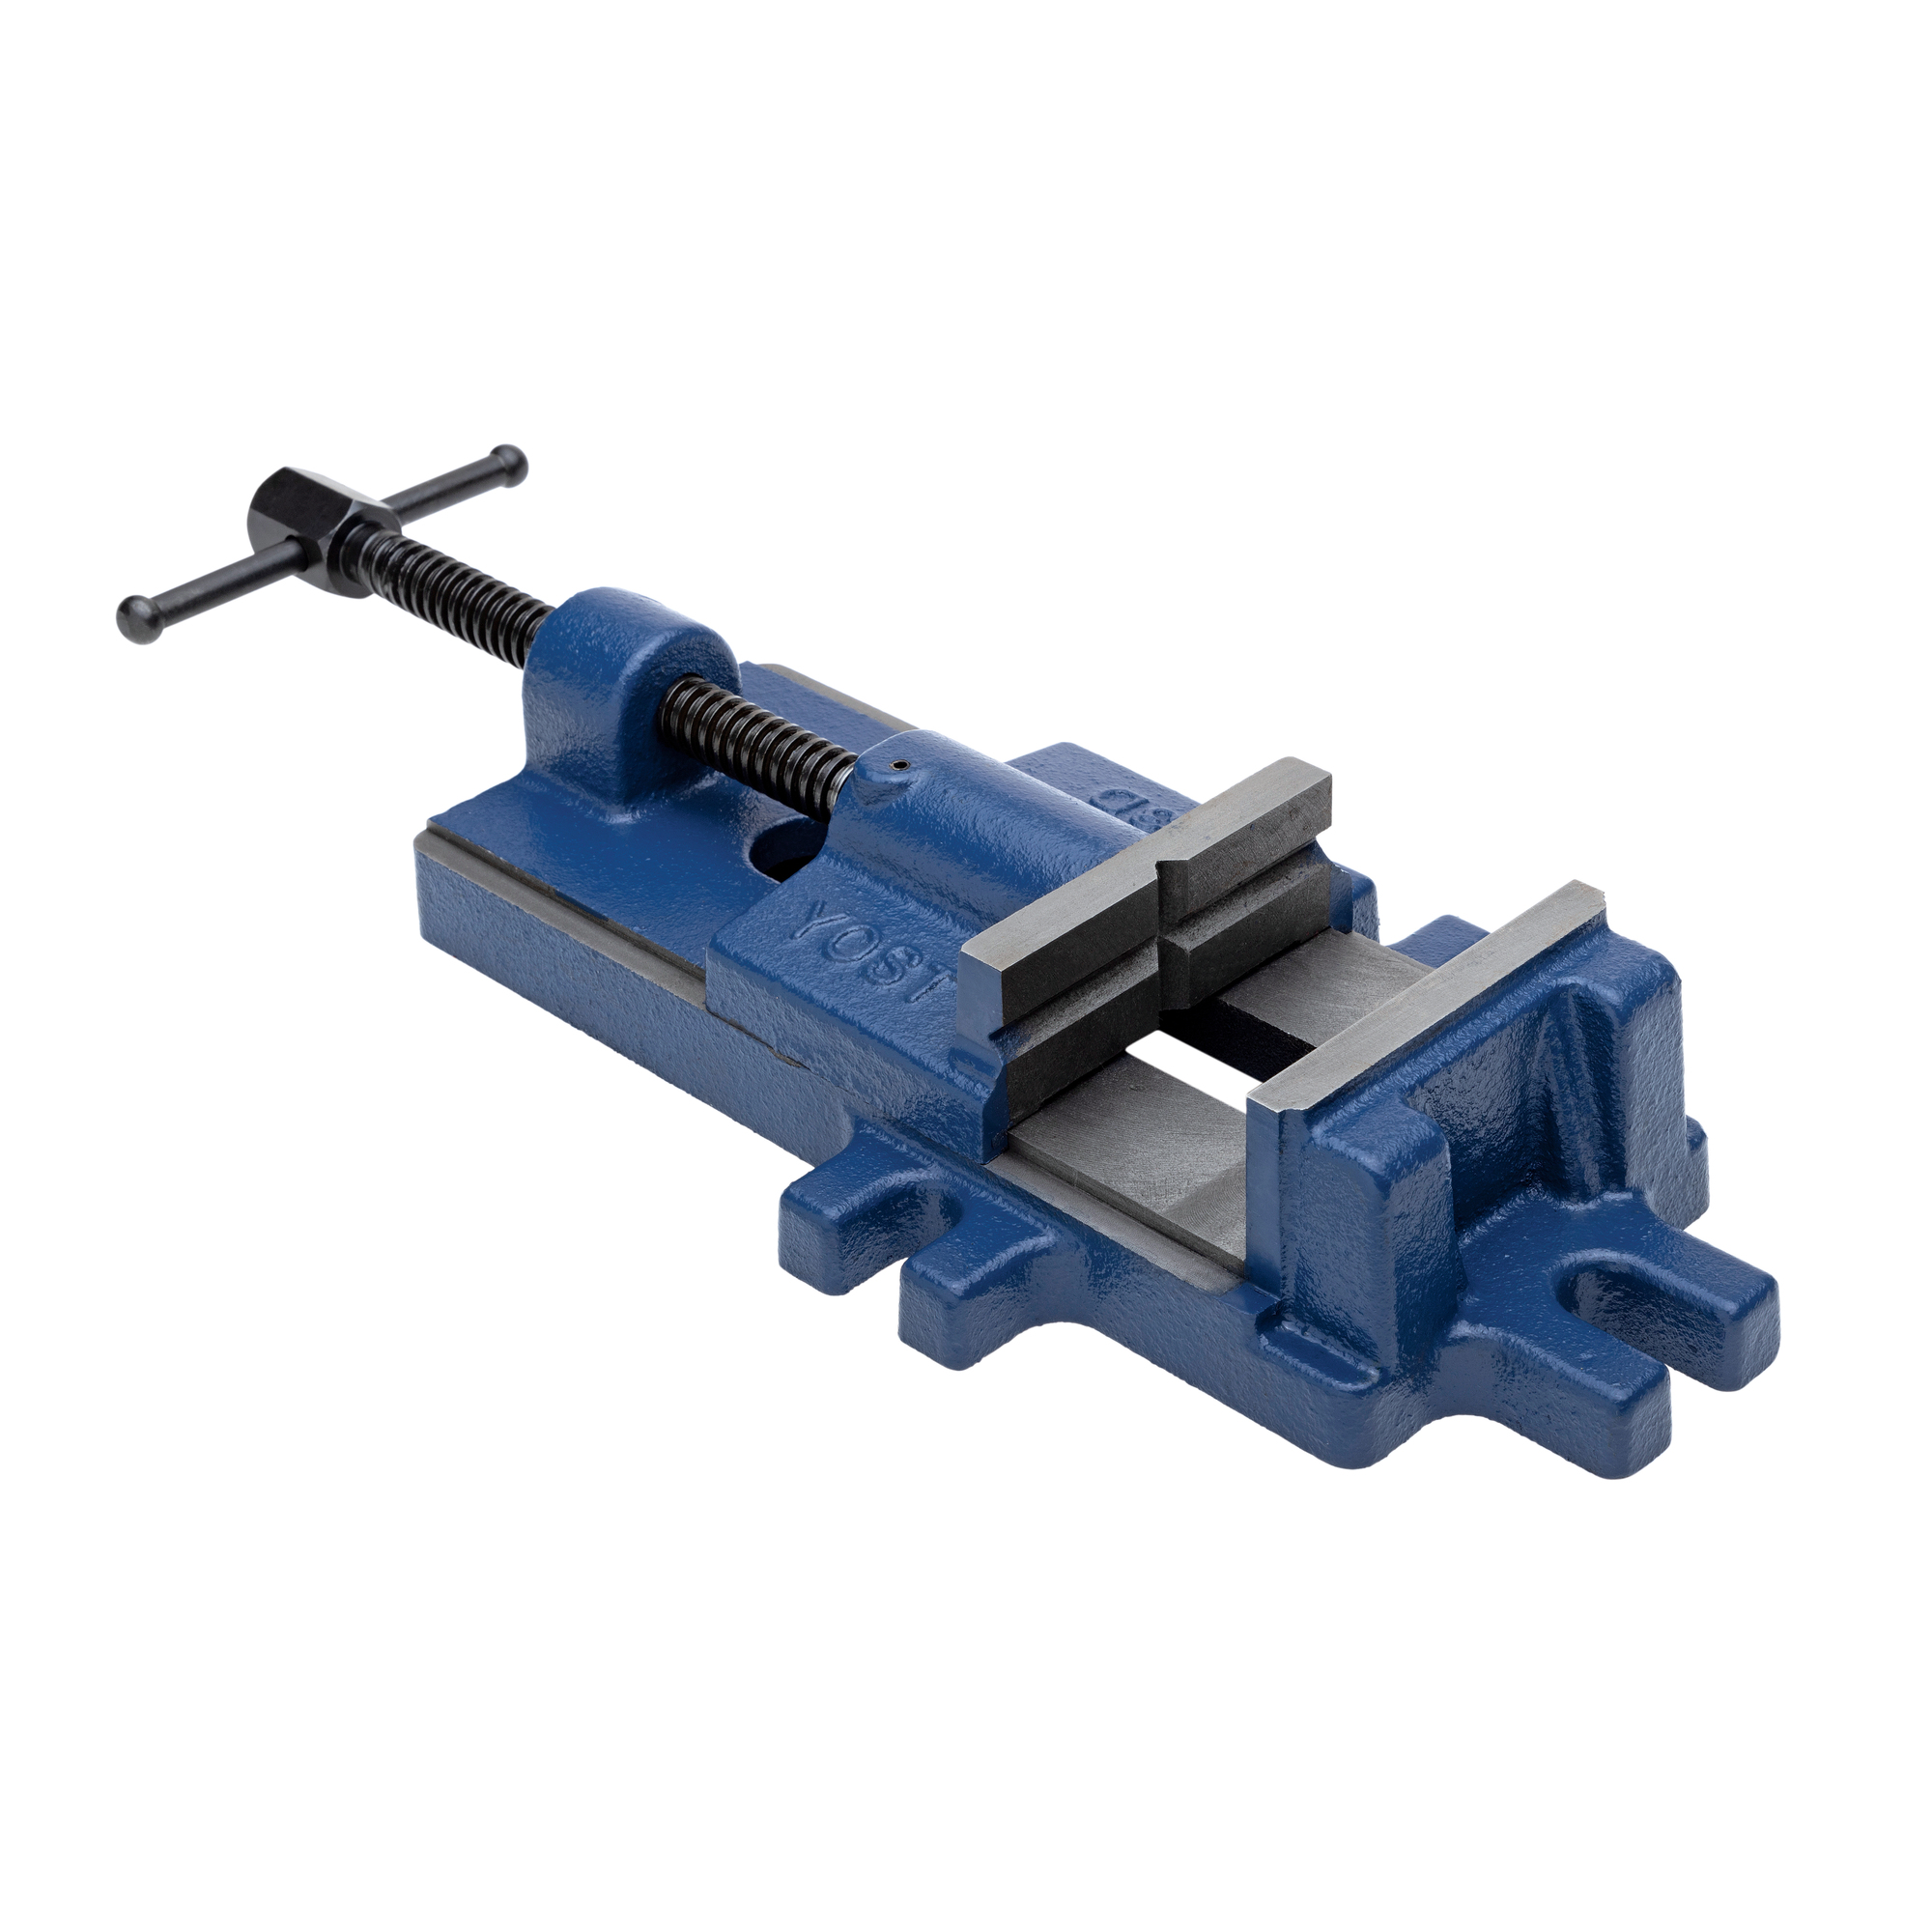 Yost Vises, 3.5Inch Drill Press Vise, Jaw Width 3.5 in, Jaw Capacity 4 in, Material Iron, Model 3D